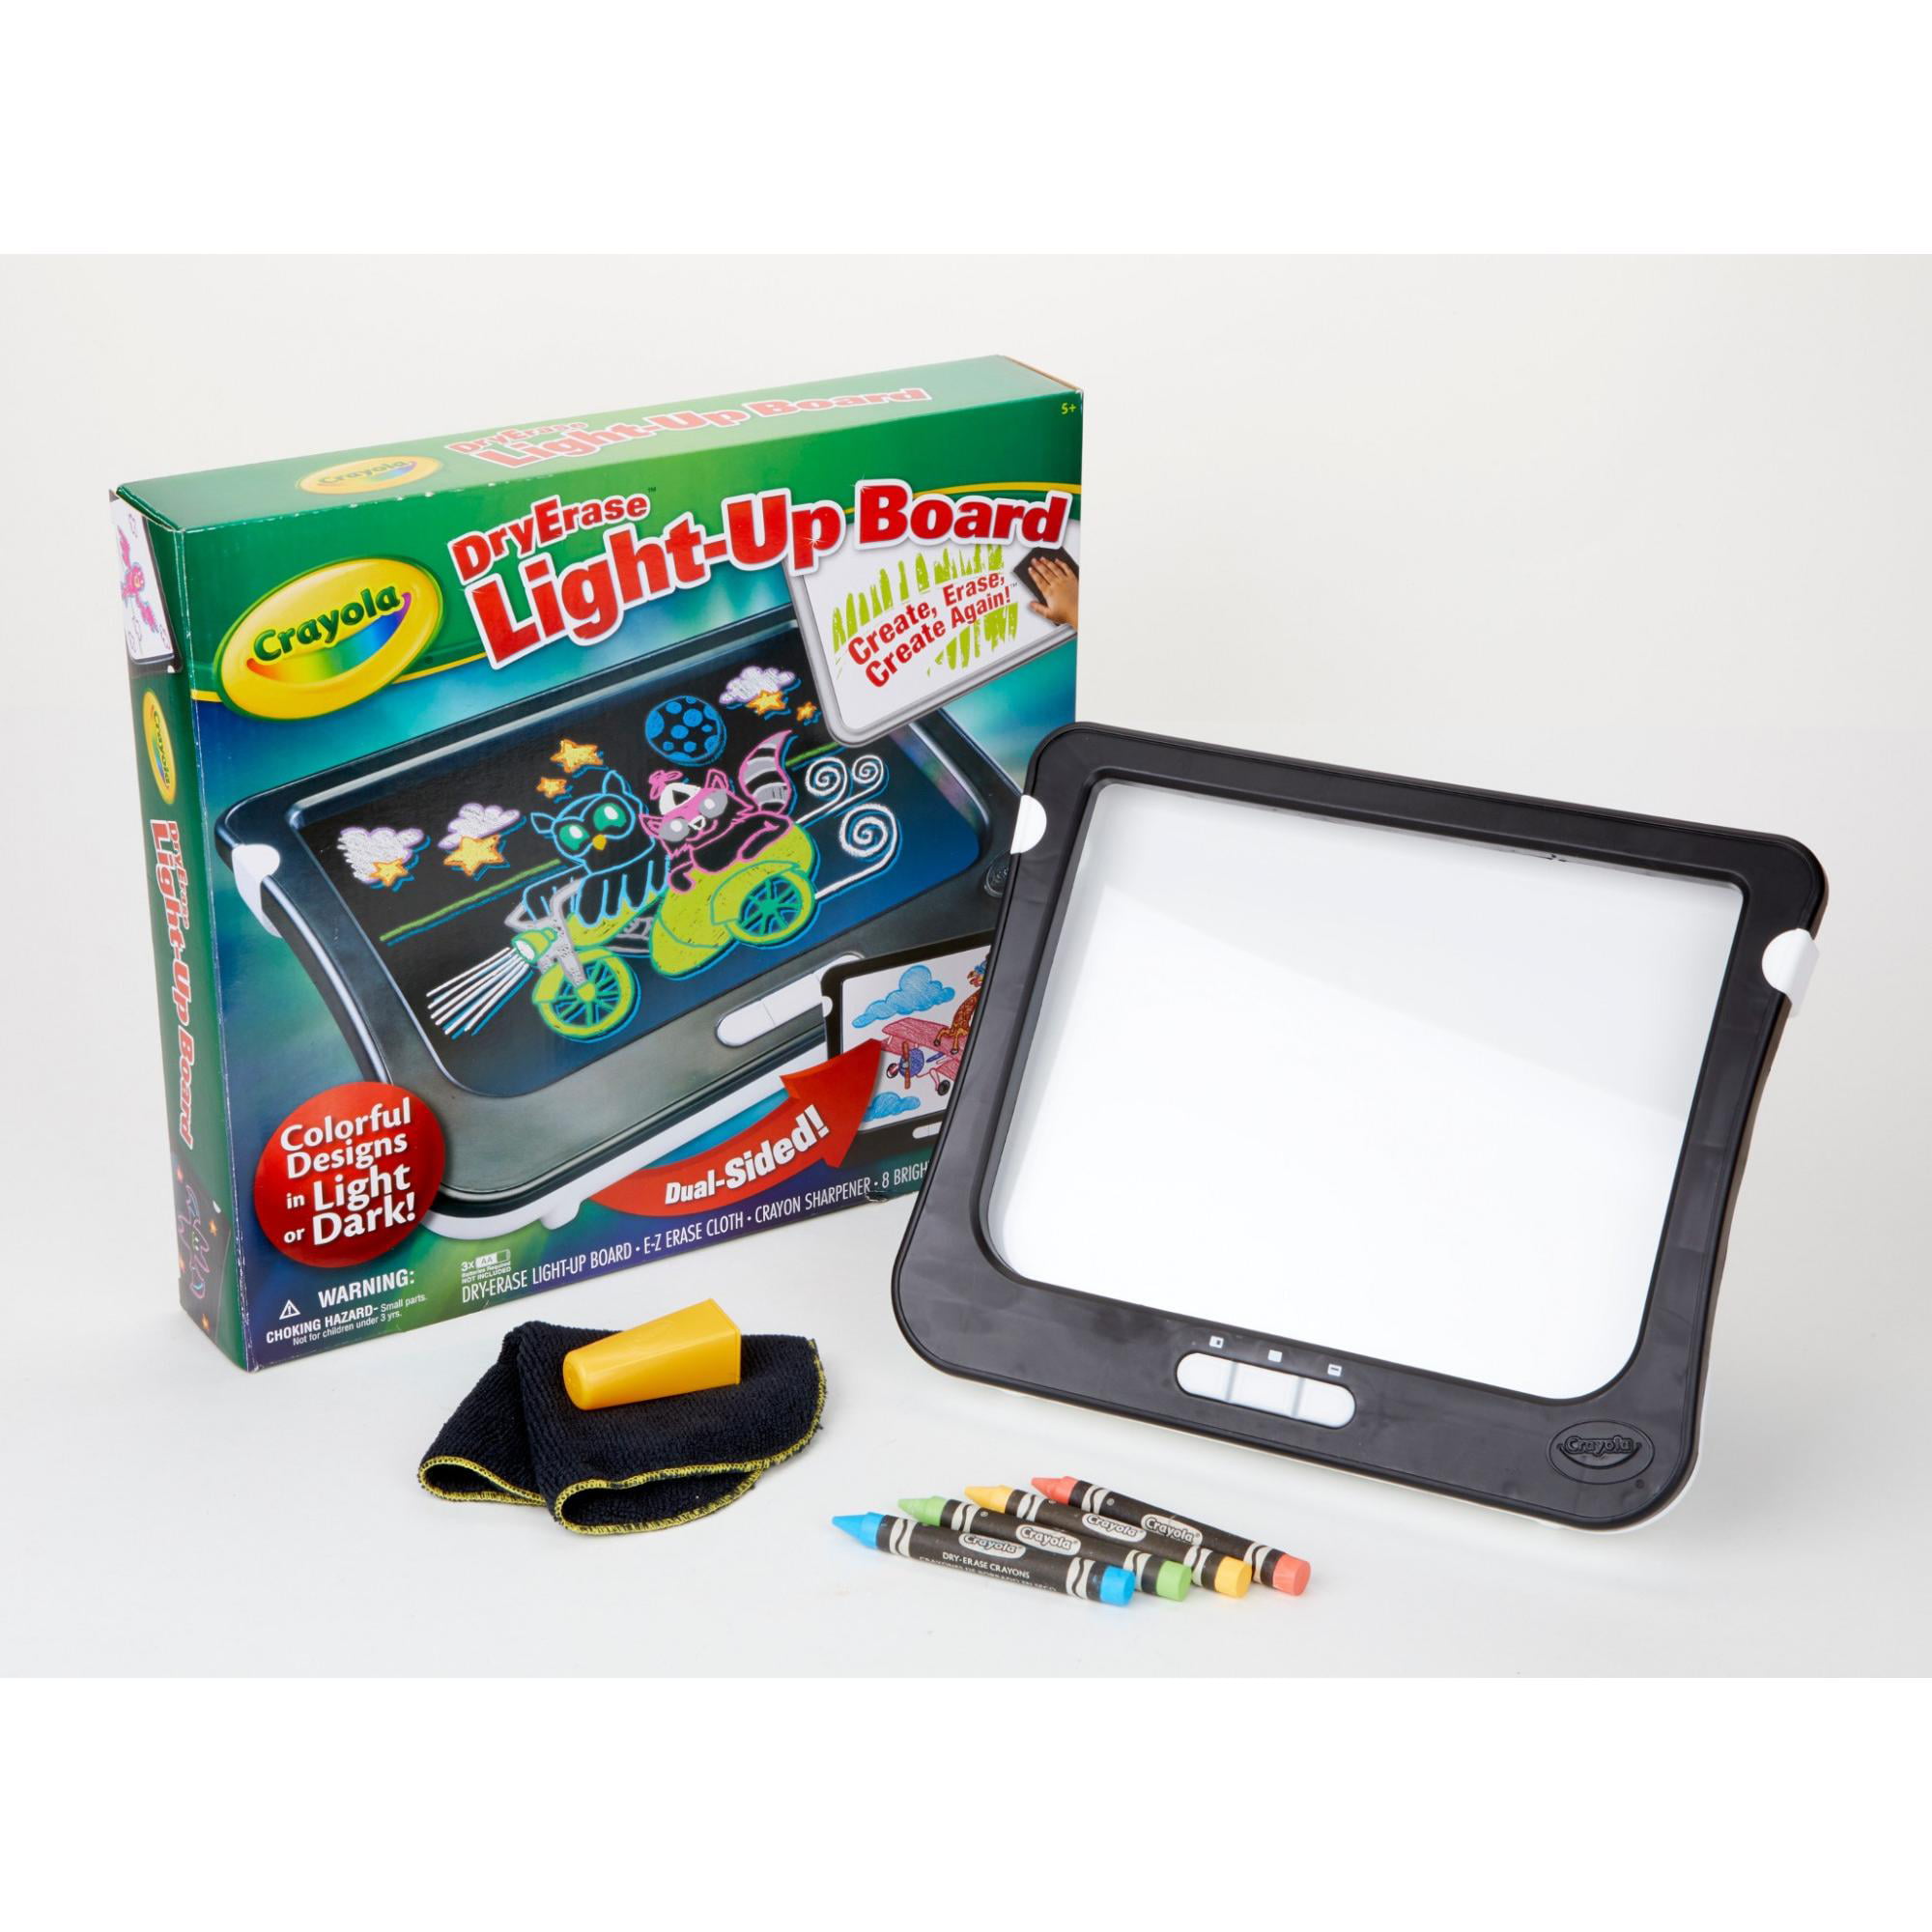 Crayola Dry Erase Light Up Board Gift For Kids Drawing And Coloring Tablet 